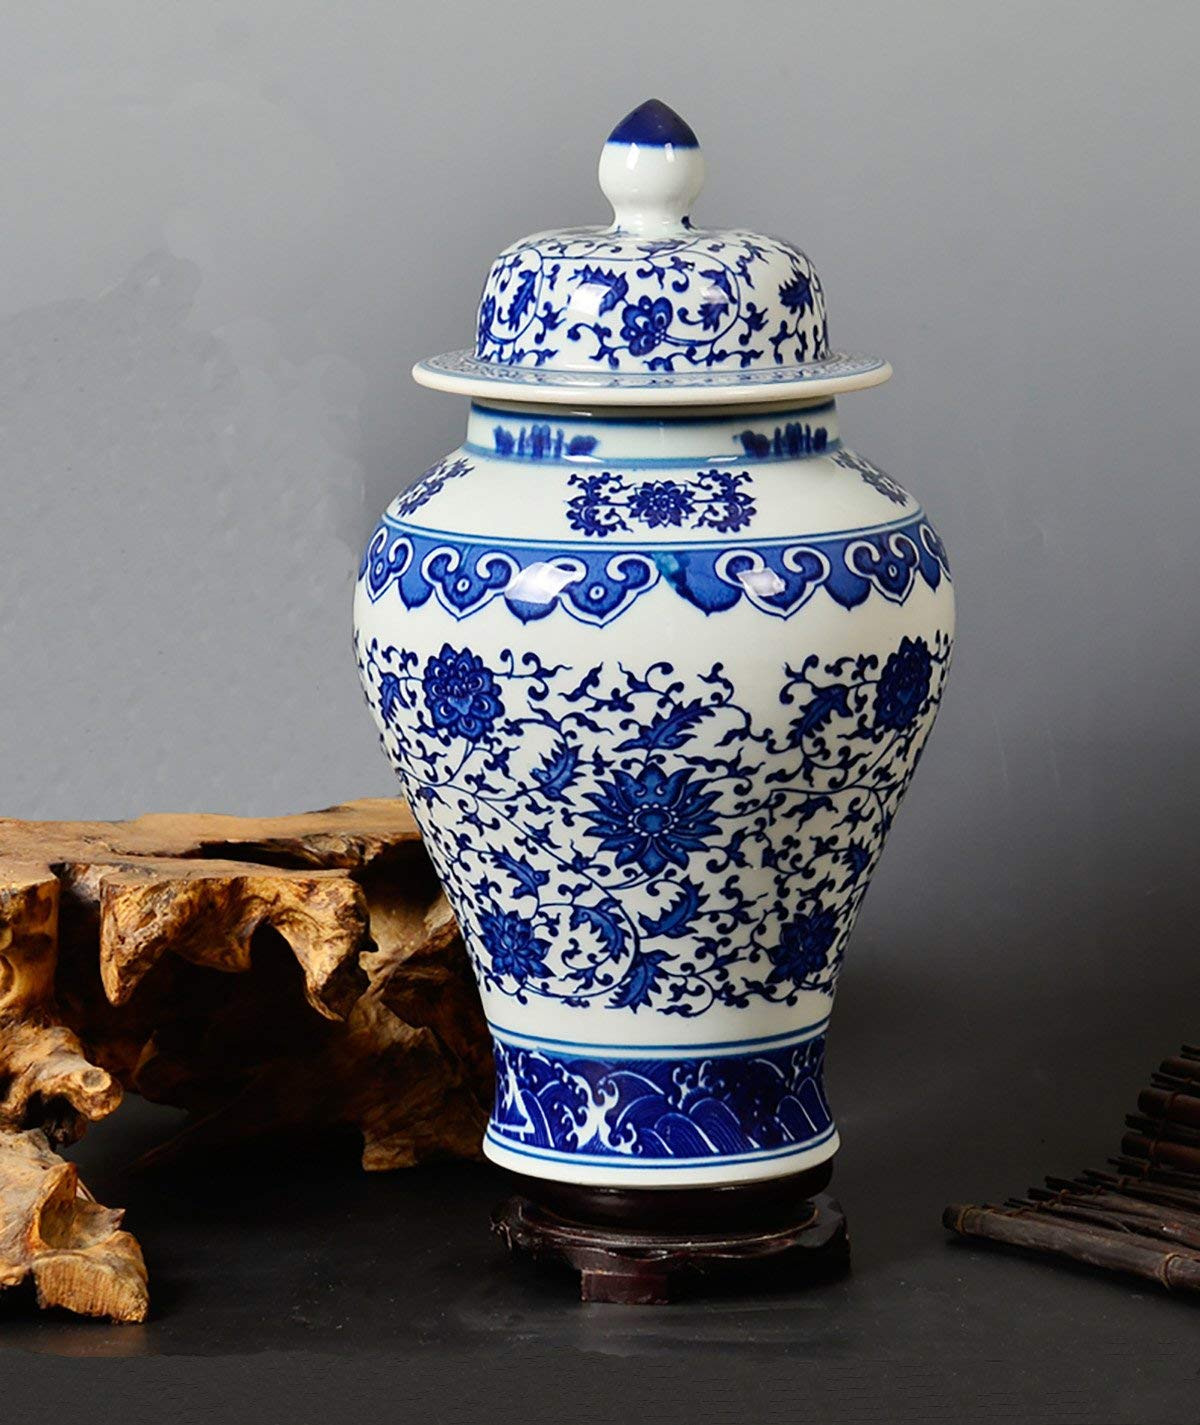 26 Awesome Ming Dynasty Vase for Sale 2024 free download ming dynasty vase for sale of amazon com all decor blue and white ceramic urn fine chinese intended for amazon com all decor blue and white ceramic urn fine chinese porcelain temple spice ja